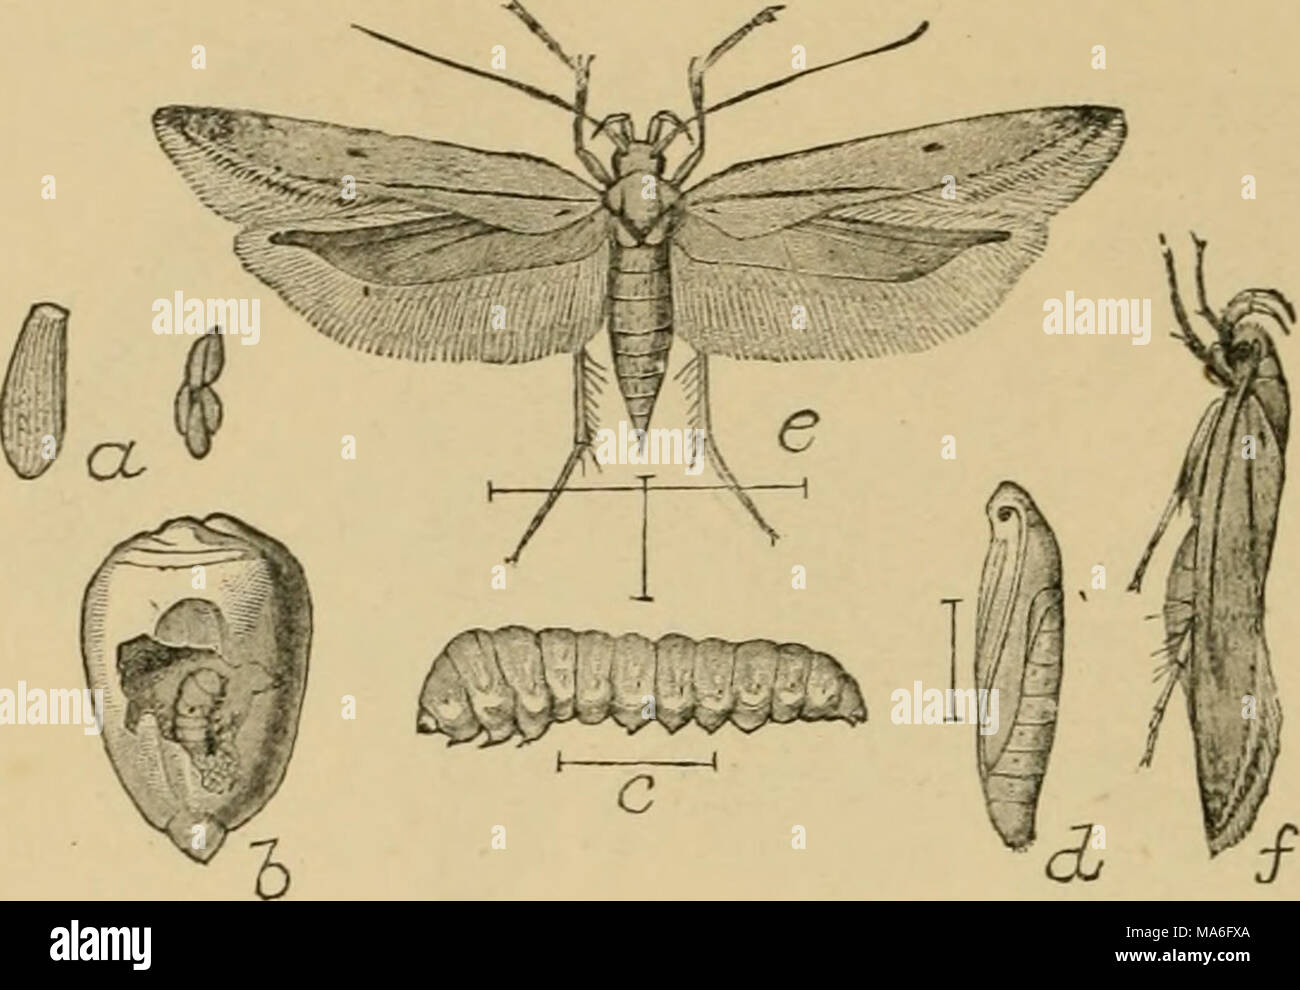 . Elementary entomology . Fig. 288. The angumois grain-moth {Sitotroga cerealella 01.). (Enlarged) a, eggs ; b, lar-a at work ; c, larva : d, pupa ; f,/, moth. (After Chittenden, United .States Department of Agriculture) from the shapes of the cases. Nearly related to them are the little clothes moths, the plague of every housekeeper, which feed on woolens, furs, etc. There are several species: one makes a case of bits of food fastened to- gether with silk, another builds a tube, and a third feeds unprotected. The more common forms are of a brown color and may be distin- guished from other sm Stock Photo